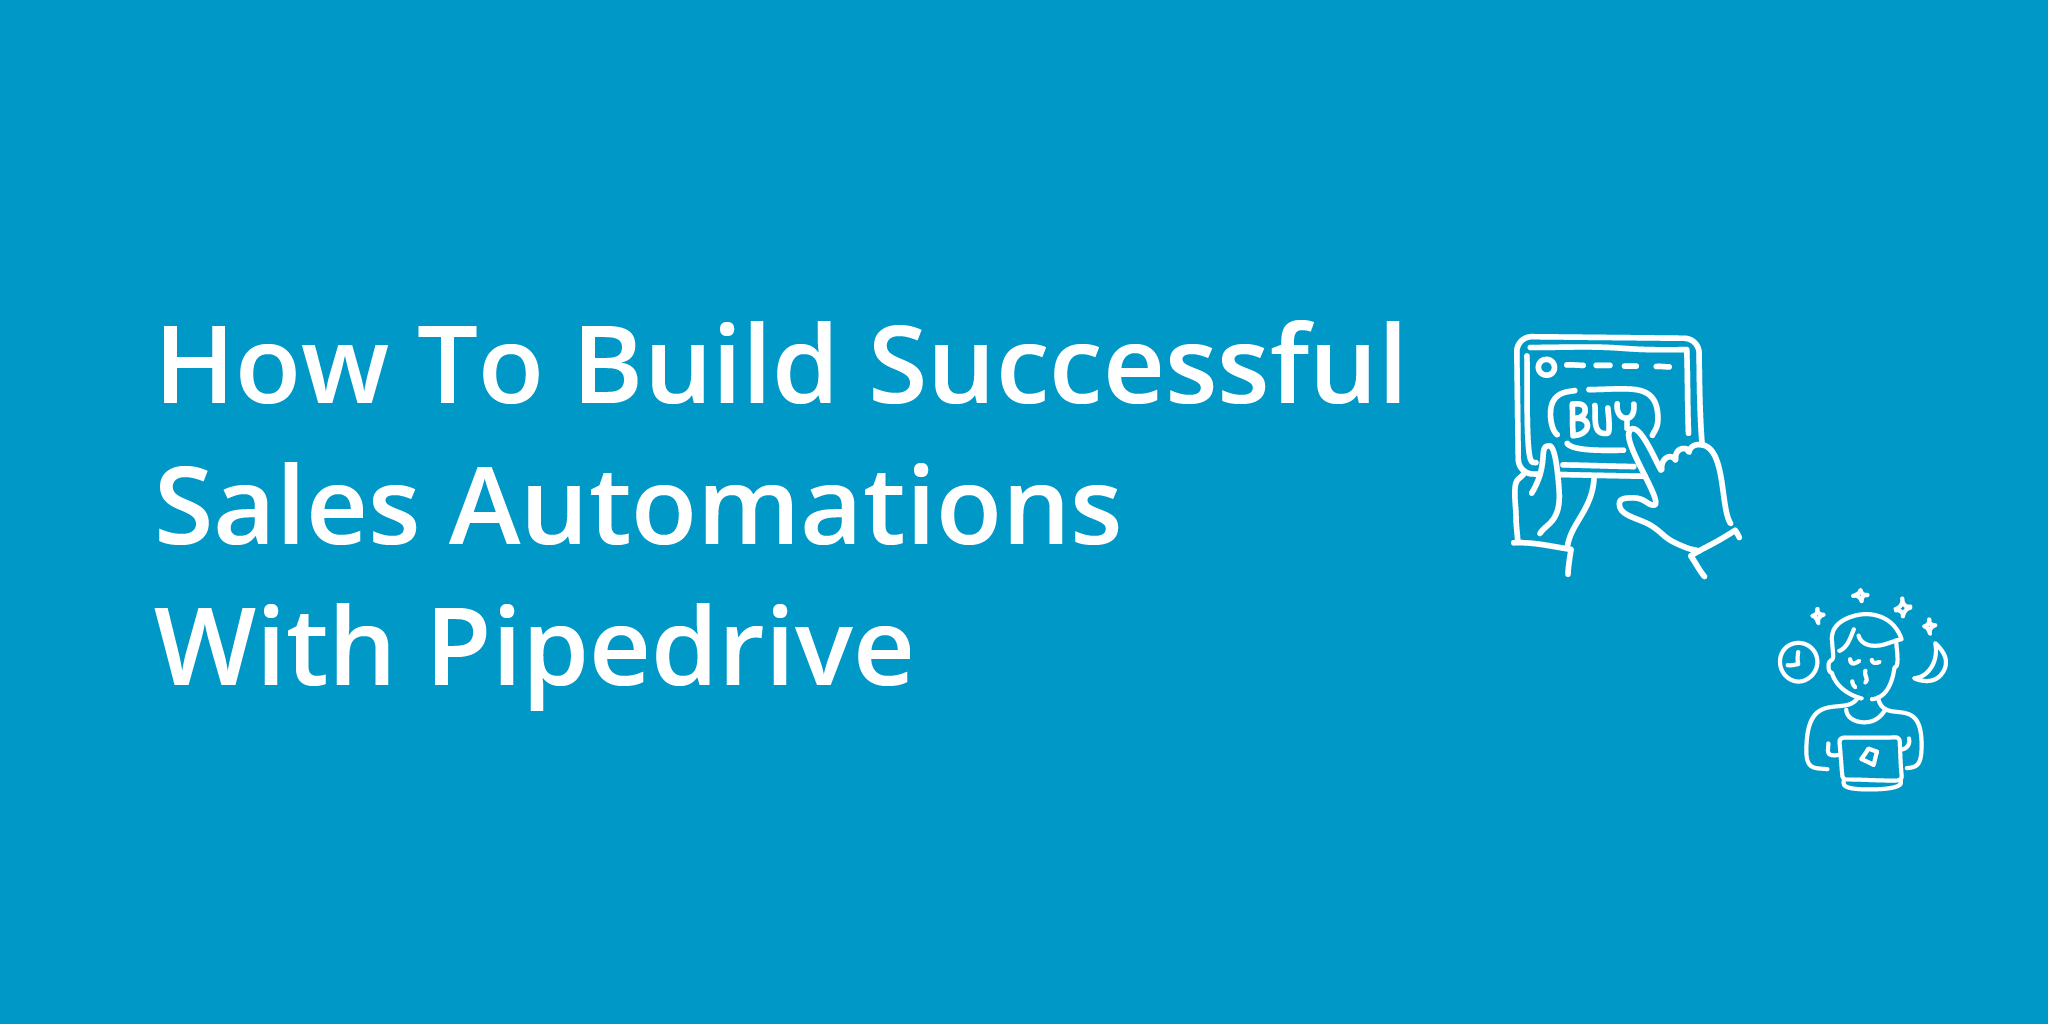 How To Build Successful Sales Automations on Pipedrive | Telephones for business